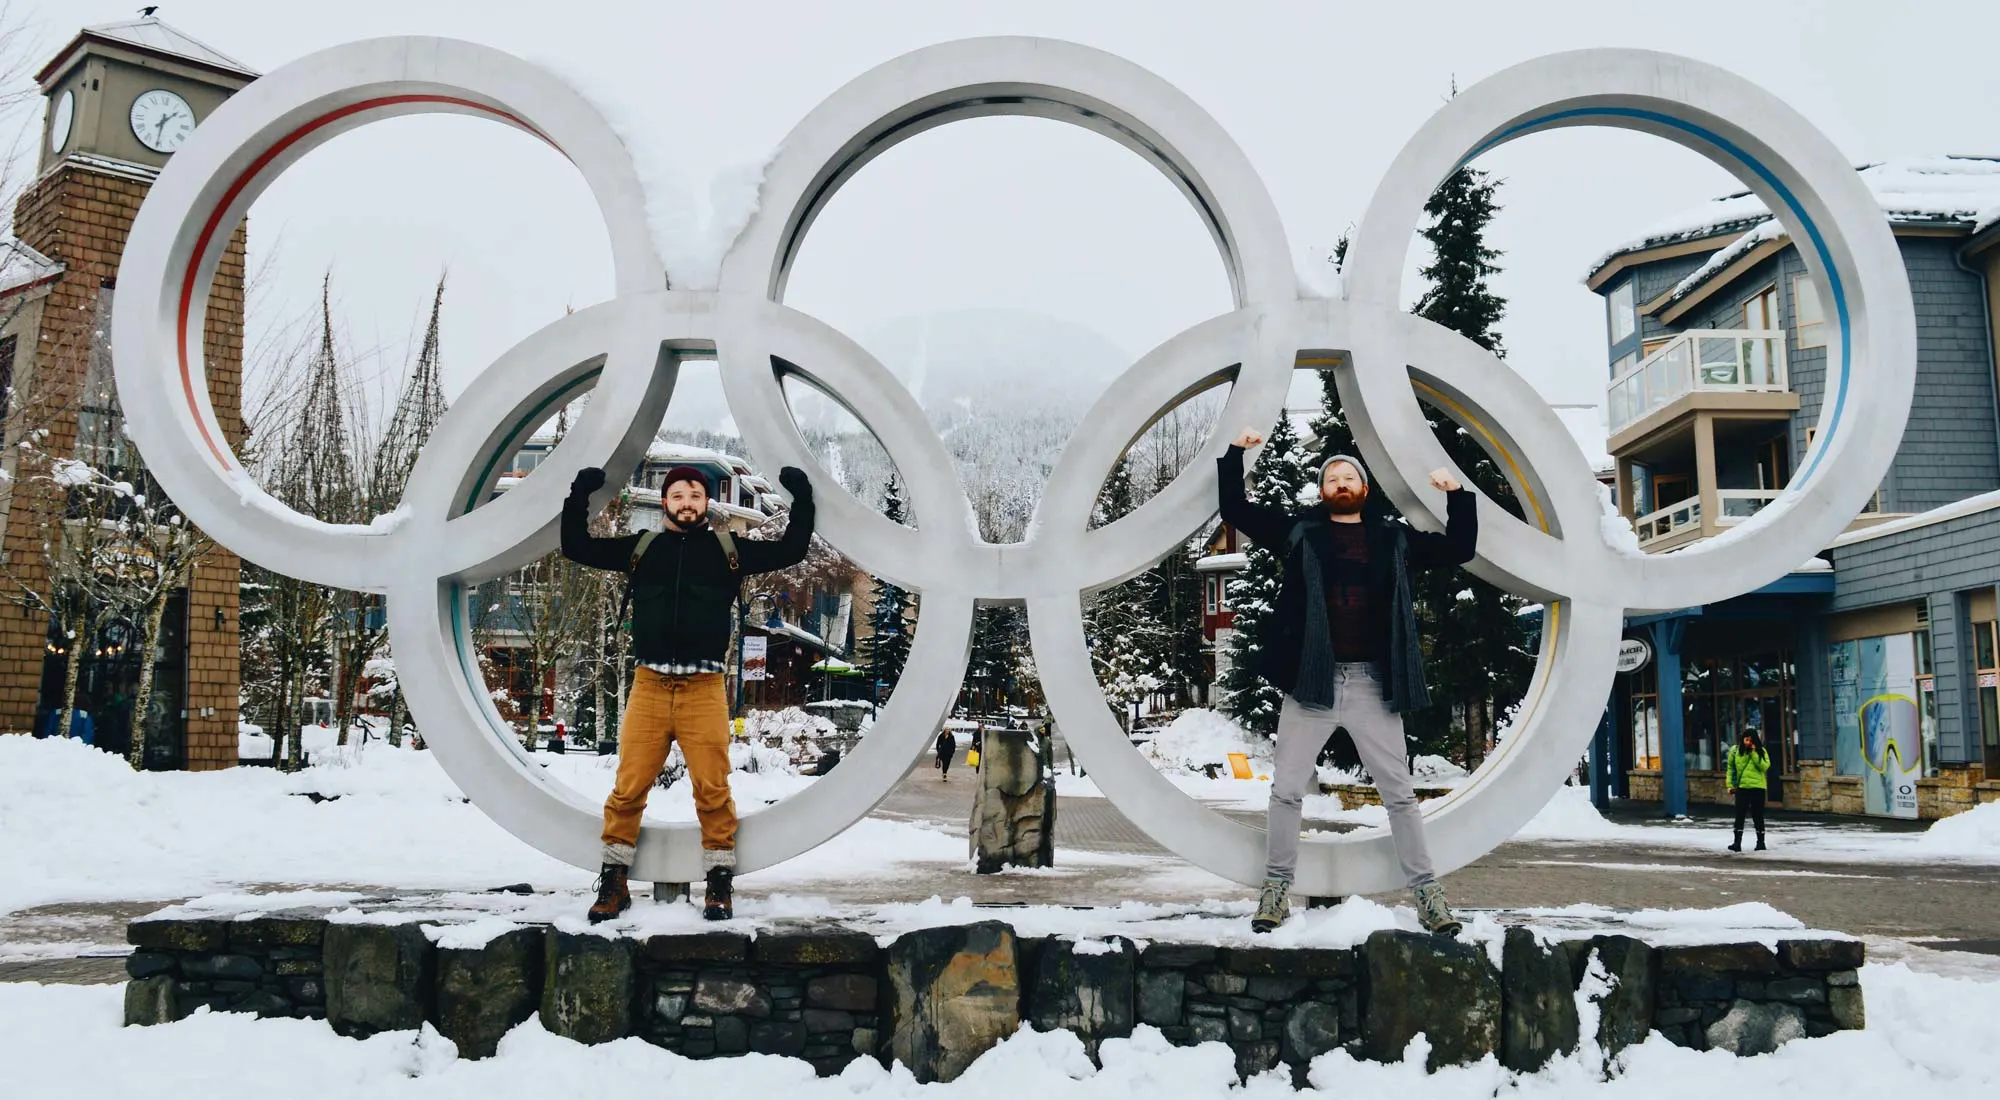 Gay Super Powers in front of the Olympic Rings in Whistler | Whistler Pride 2018 Gay Ski Week © Coupleofmen.com